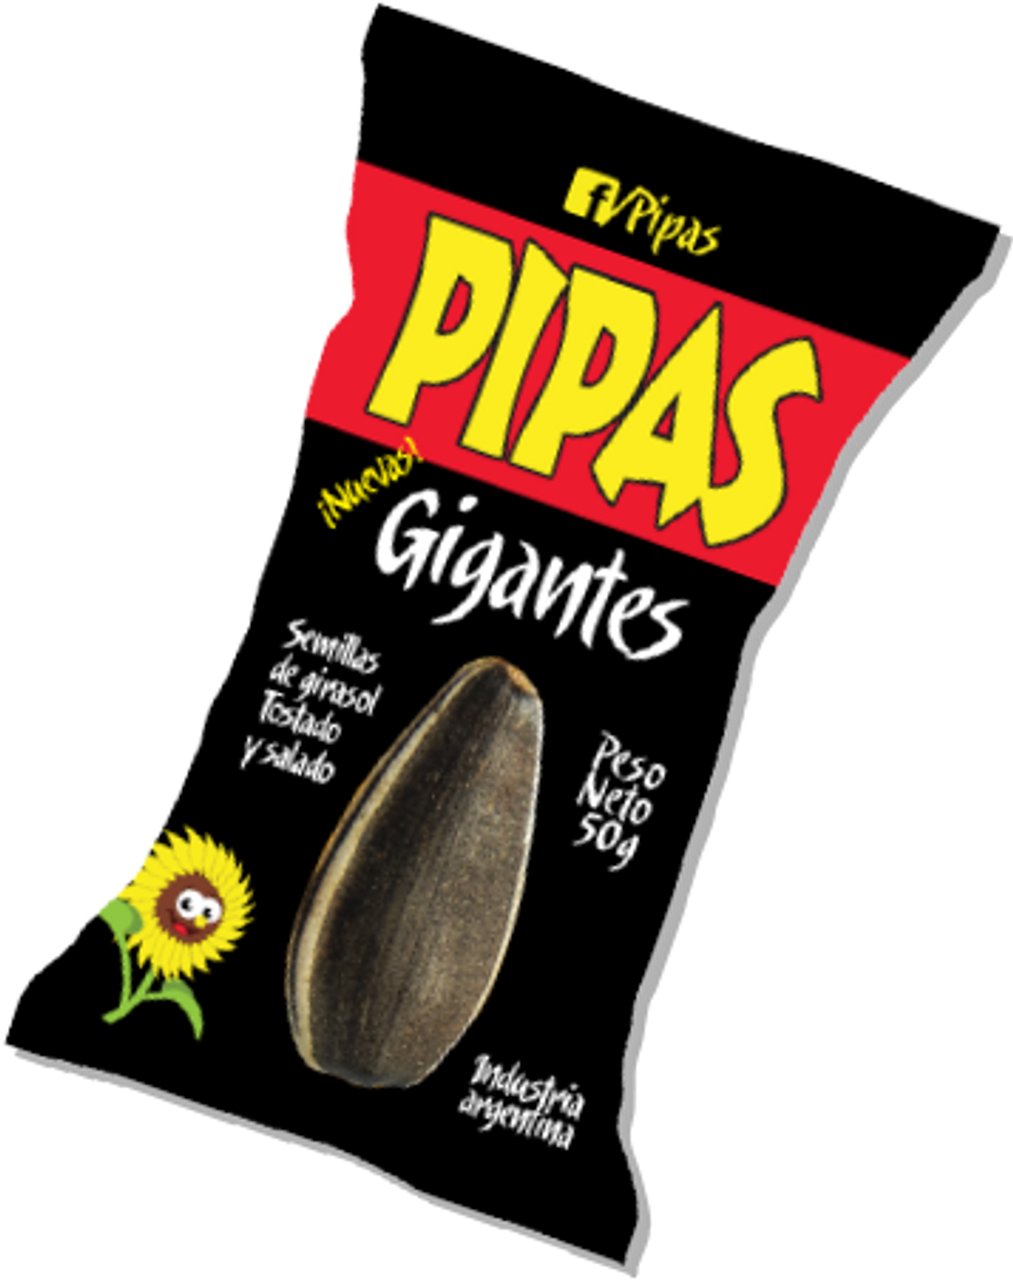 Pipas Gigantes Salty Toasted Sunflower Seeds w/shell, 50 g / 1.76 oz (pack  of 10)